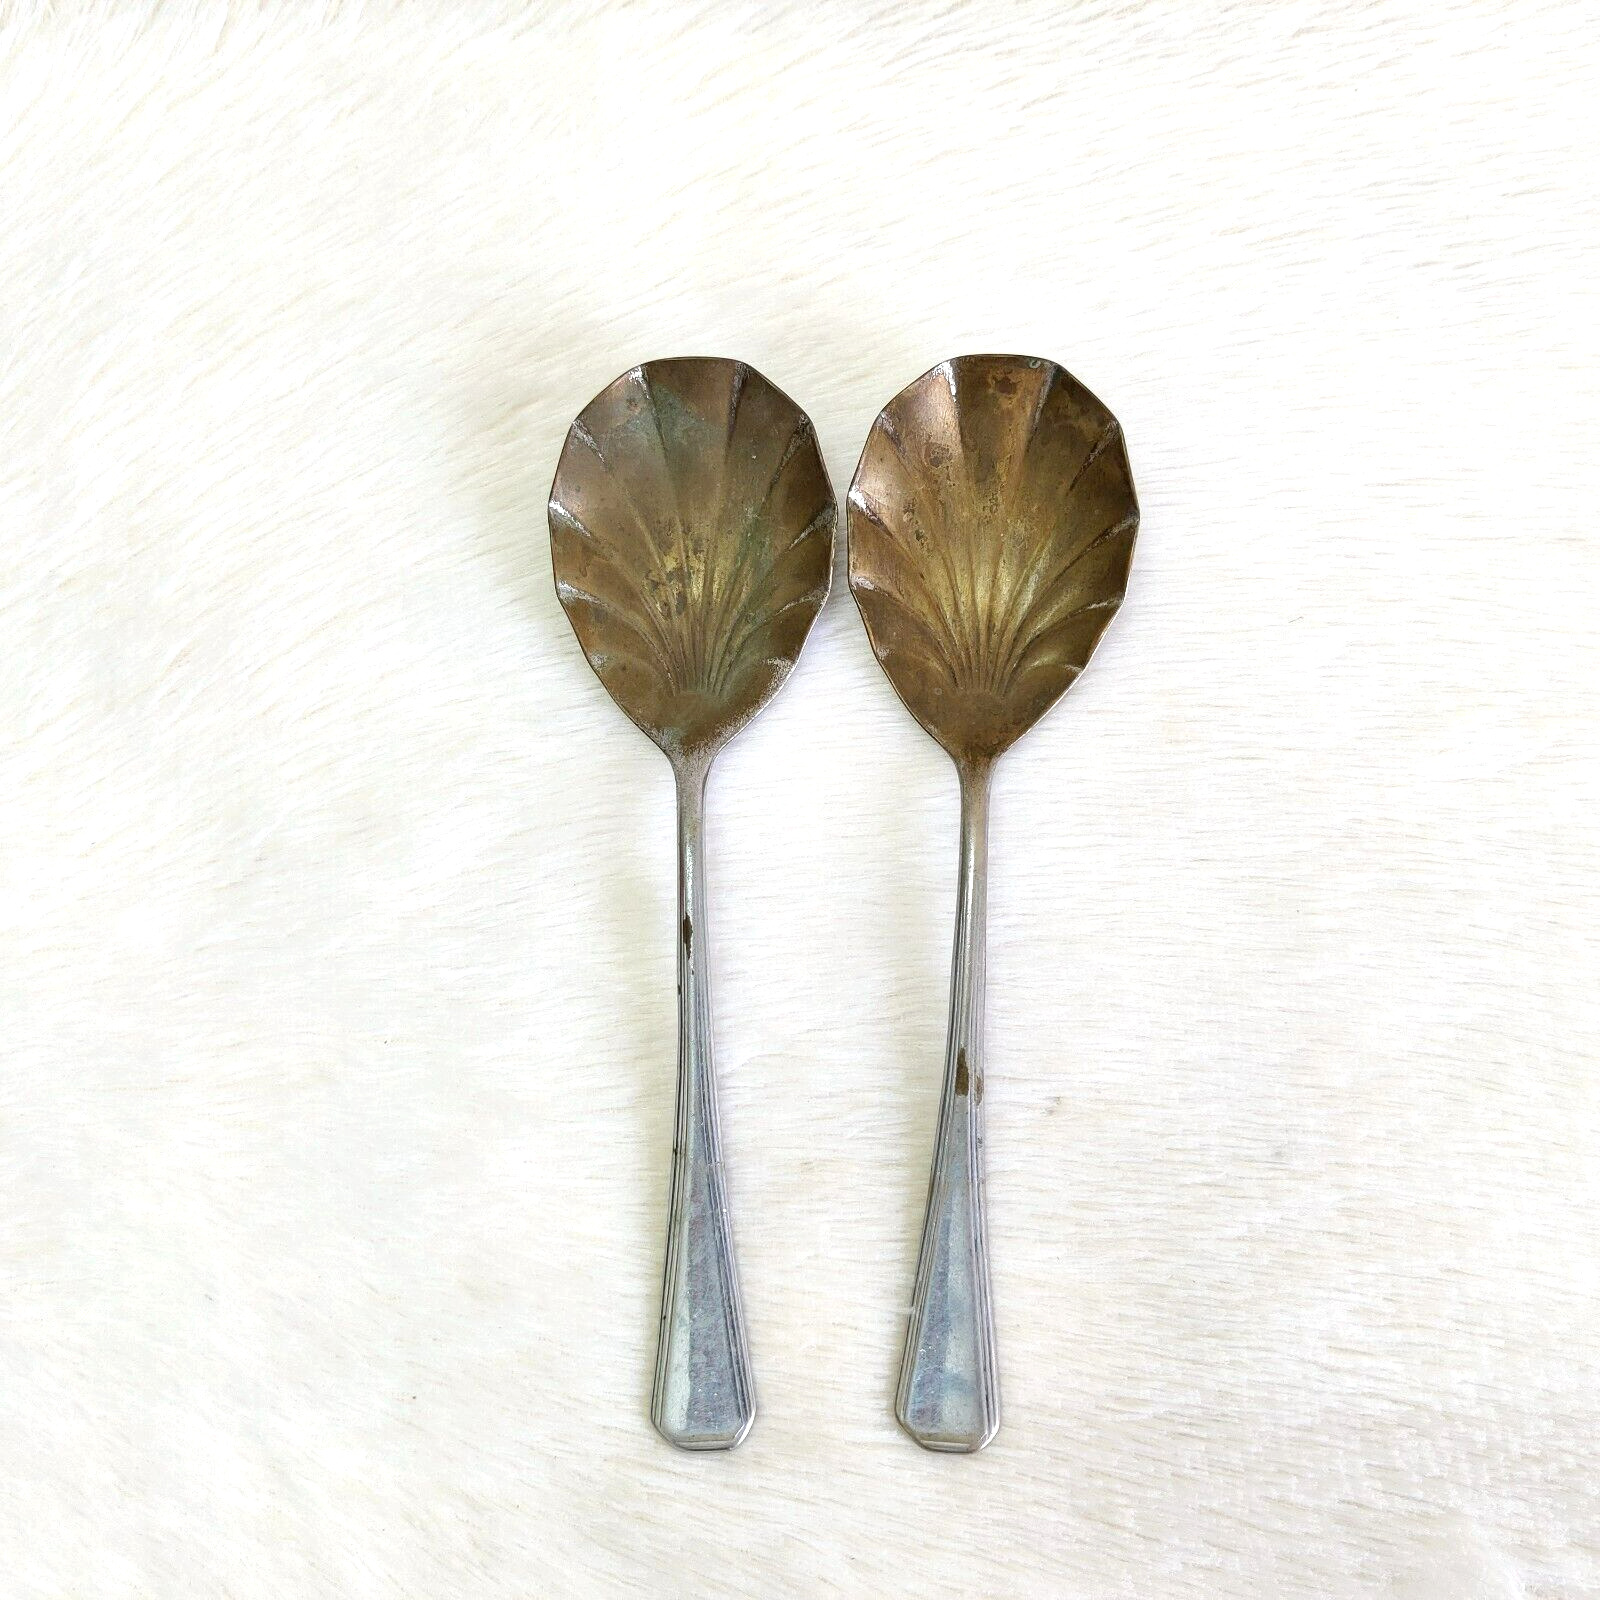 1930s Vintage Brass Leaf Shape Spoon Head Kitchenware Collectible Old 2 Pcs 79